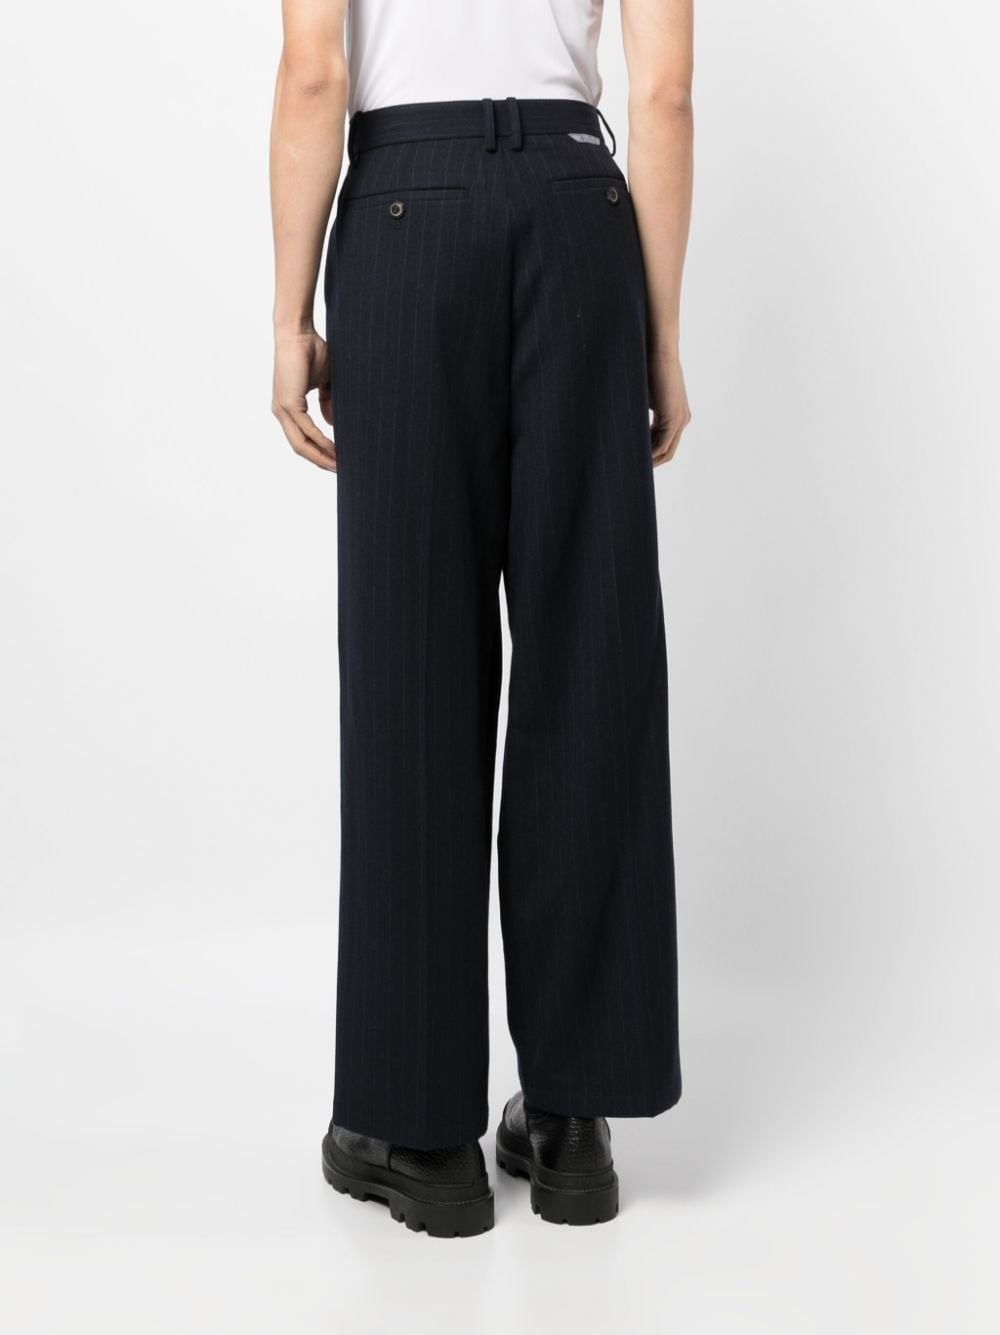 pinstripe-print tailored trousers - 4